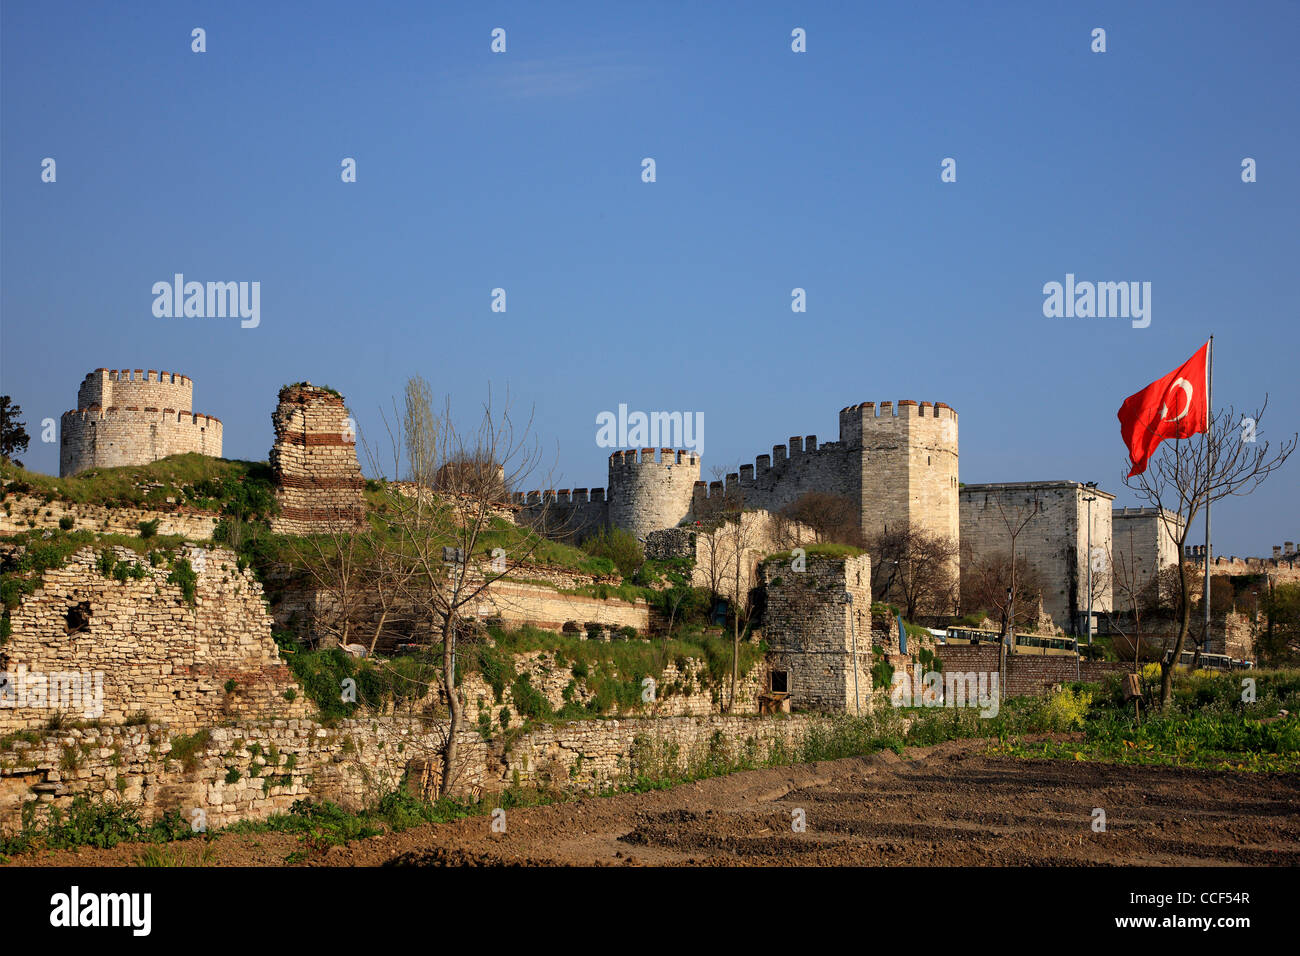 The 'Yedi Kule' (means 'Seven Towers') at the southeast edge of the Theodosian (byzantine) walls of Istanbul, Turkey. Stock Photo